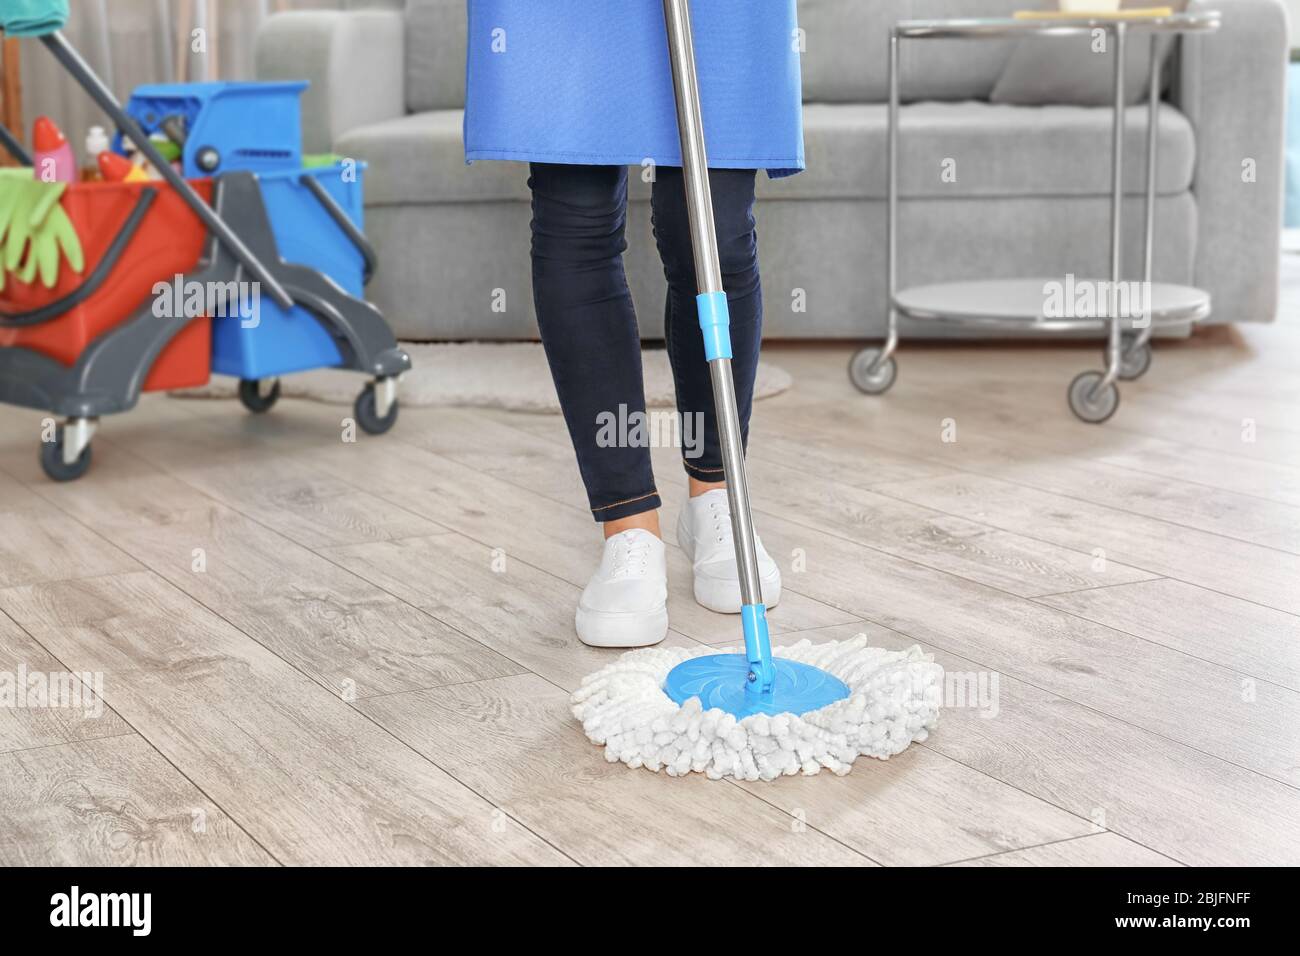 Woman mopping floor at home Stock Photo